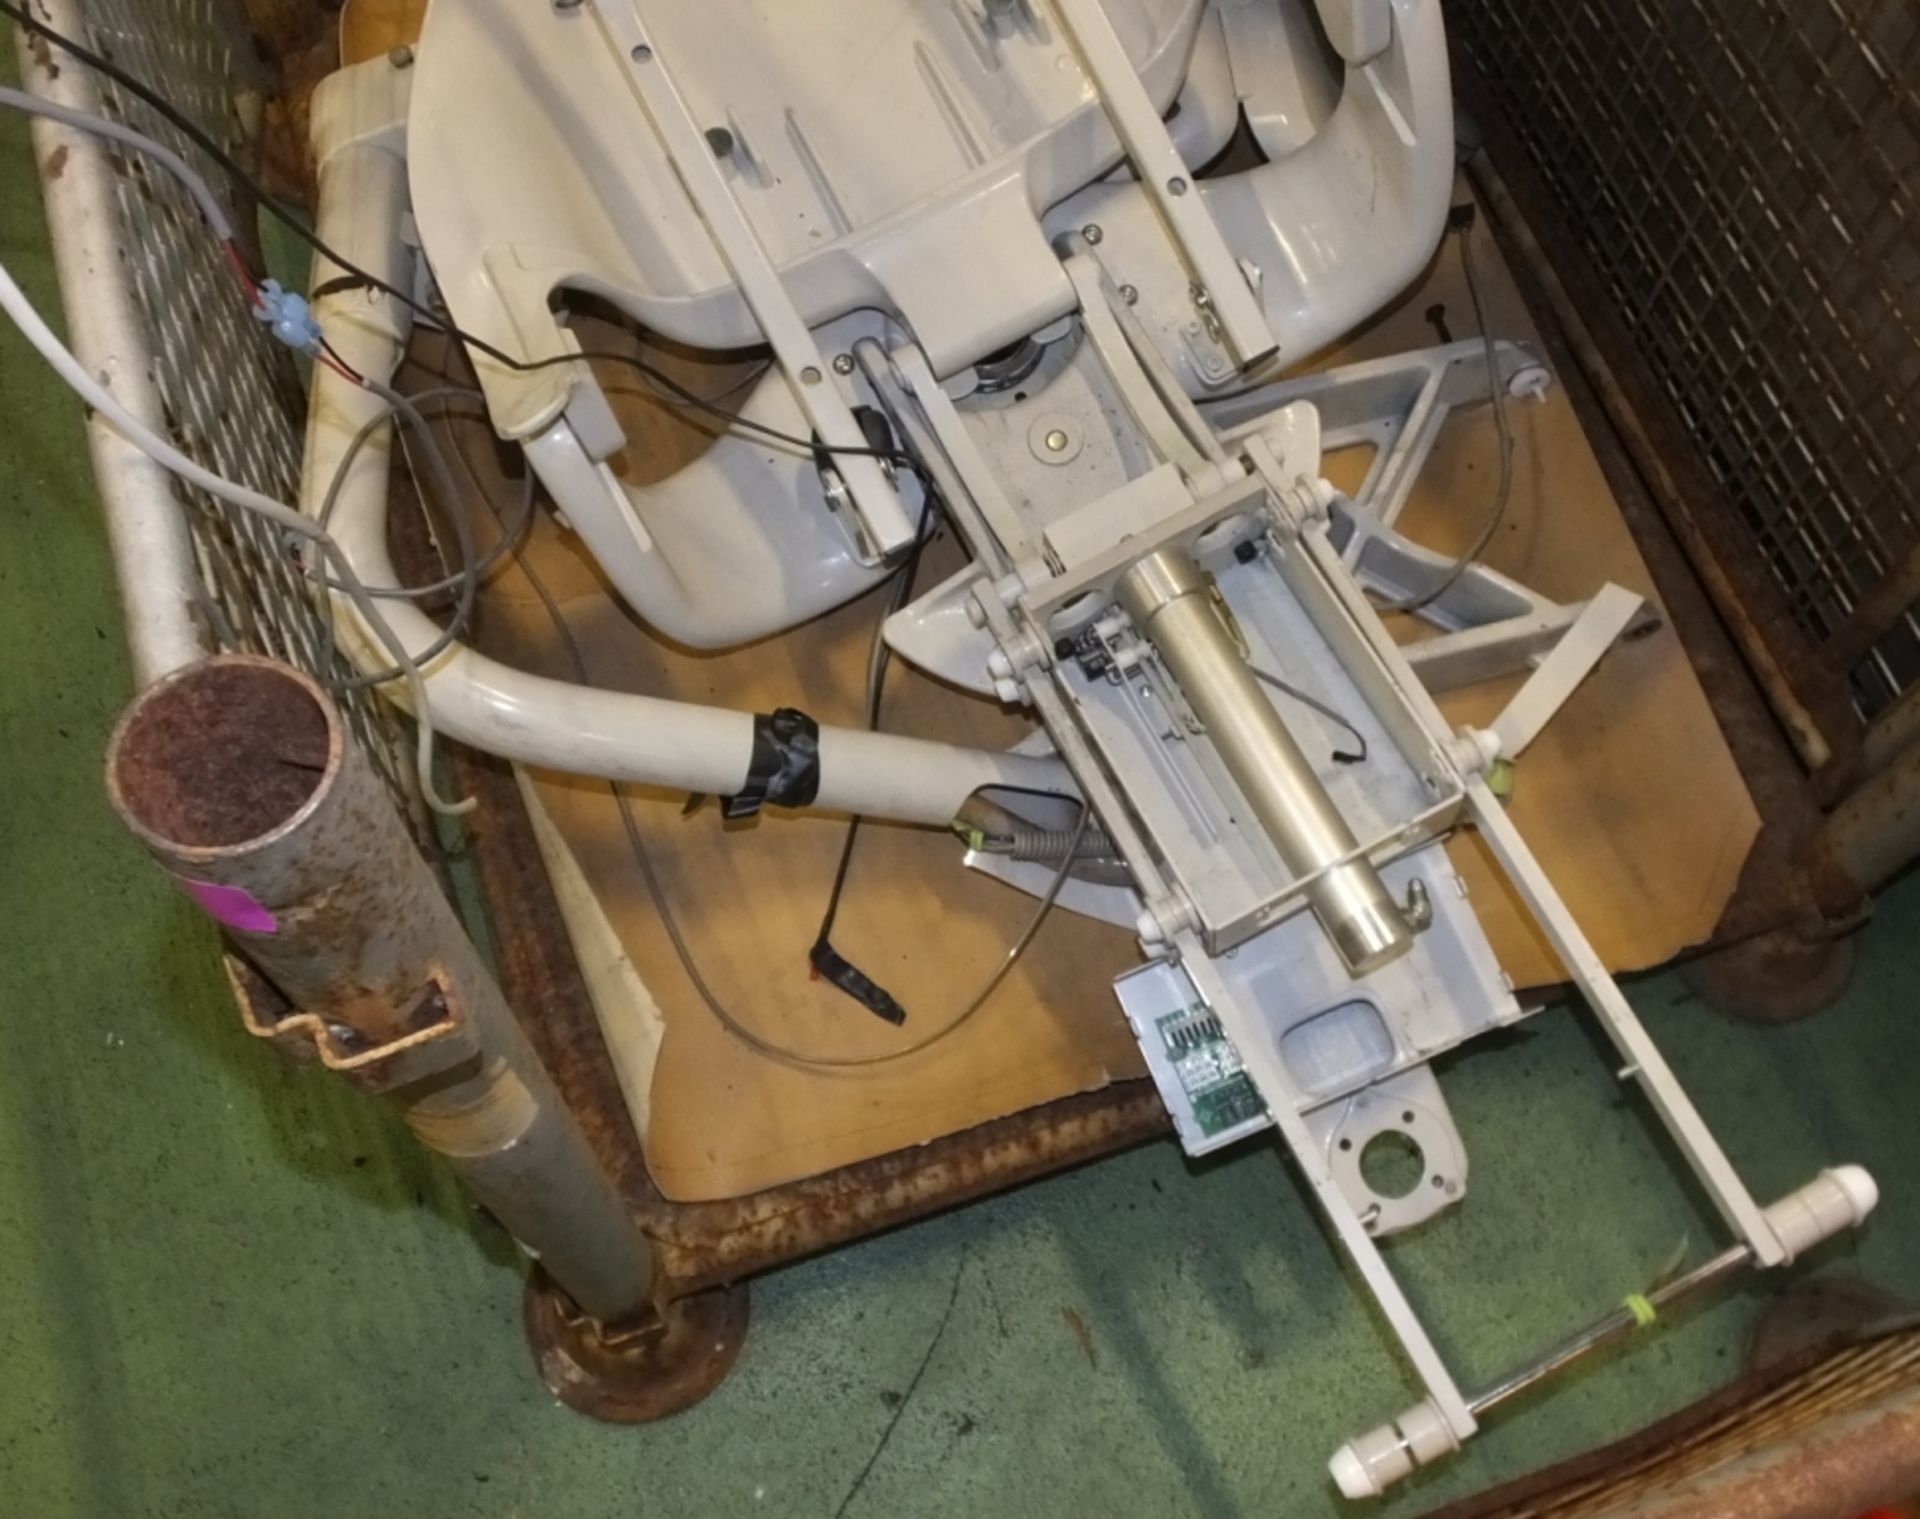 Midmark Dental Operating Chair - disassembled - 2 pallets - Image 2 of 5